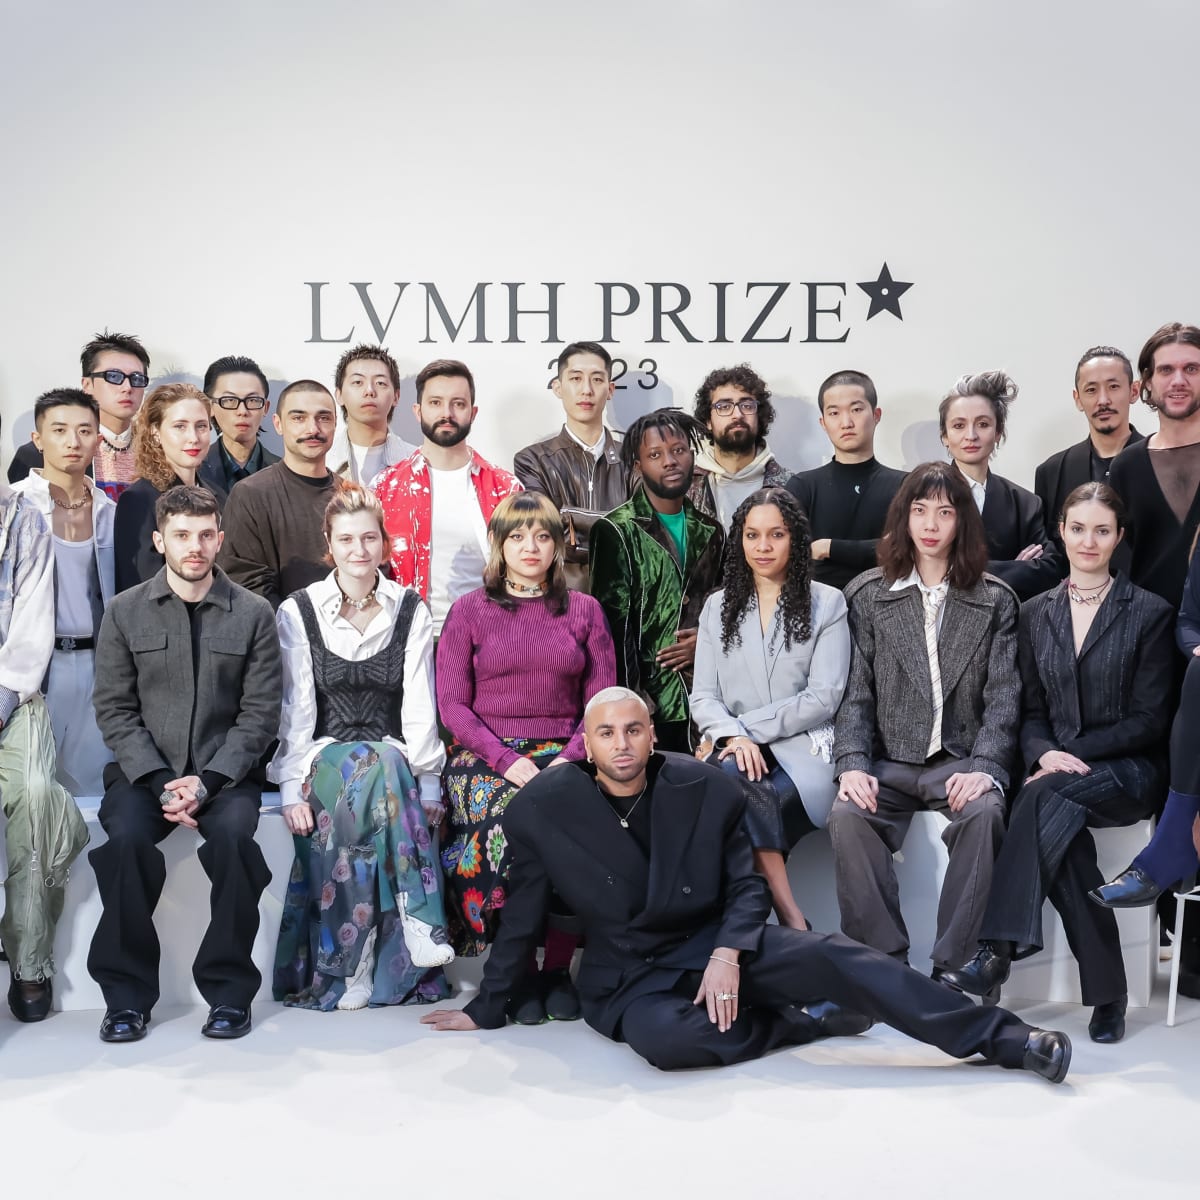 Meet the 22 Semi-Finalists for the 2023 LVMH Prize - Paris Fashion